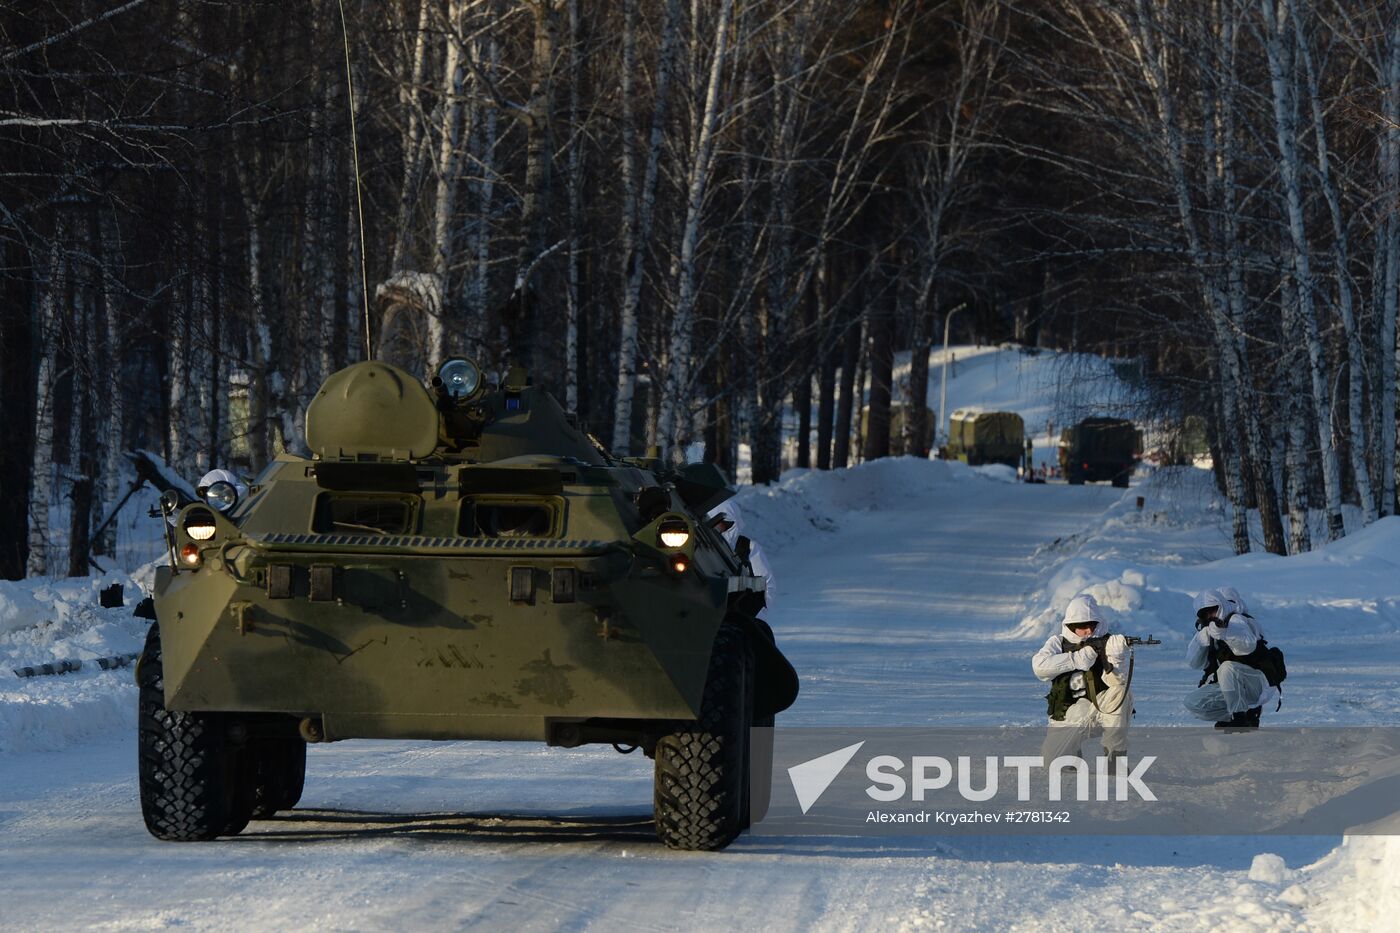 Missile systems on combat duty in Novosibirsk region